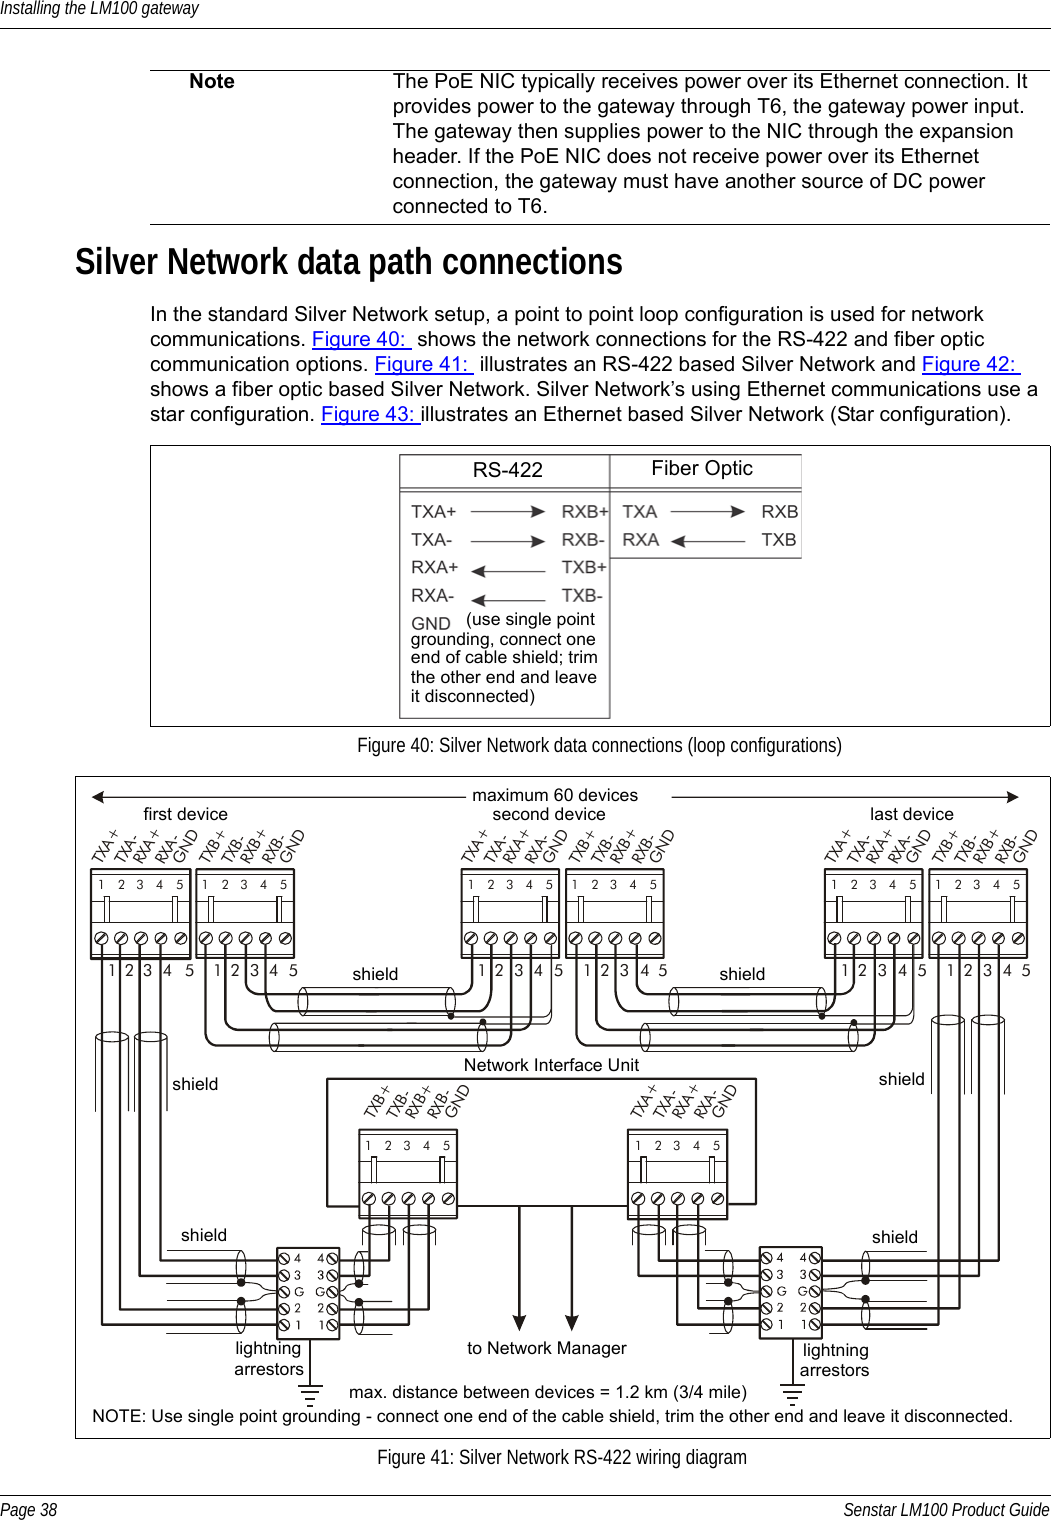 Installing the LM100 gatewayPage 38 Senstar LM100 Product GuideSilver Network data path connectionsIn the standard Silver Network setup, a point to point loop configuration is used for network communications. Figure 40:  shows the network connections for the RS-422 and fiber optic communication options. Figure 41:  illustrates an RS-422 based Silver Network and Figure 42: shows a fiber optic based Silver Network. Silver Network’s using Ethernet communications use a star configuration. Figure 43: illustrates an Ethernet based Silver Network (Star configuration).     Note The PoE NIC typically receives power over its Ethernet connection. It provides power to the gateway through T6, the gateway power input. The gateway then supplies power to the NIC through the expansion header. If the PoE NIC does not receive power over its Ethernet connection, the gateway must have another source of DC power connected to T6.Figure 40: Silver Network data connections (loop configurations)Figure 41: Silver Network RS-422 wiring diagramRS-422 Fiber Optic(use single pointgrounding, connect oneend of cable shield; trimthe other end and leaveit disconnected)1122334455RXB+RXB-GNDTXB+TXB-RXA+RXA-GNDTXA+TXA-112233445512345 123451122334455123451234512345 12345RXB+RXB-GNDTXB+TXB-RXA+RXA-GNDTXA+TXA-RXB+RXB-GNDTXB+TXB-RXA+RXA-GNDTXA+TXA-RXA+RXA-GNDTXA+TXA-12345RXB+RXB-GNDTXB+TXB-12345maximum 60 devicesmax. distance between devices = 1.2 km (3/4 mile)first device second device last deviceshield shieldshield shieldshieldshieldNOTE: Use single point grounding - connect one end of the cable shield, trim the other end and leave it disconnected.Network Interface Unitlightningarrestorslightningarrestorsto Network Manager